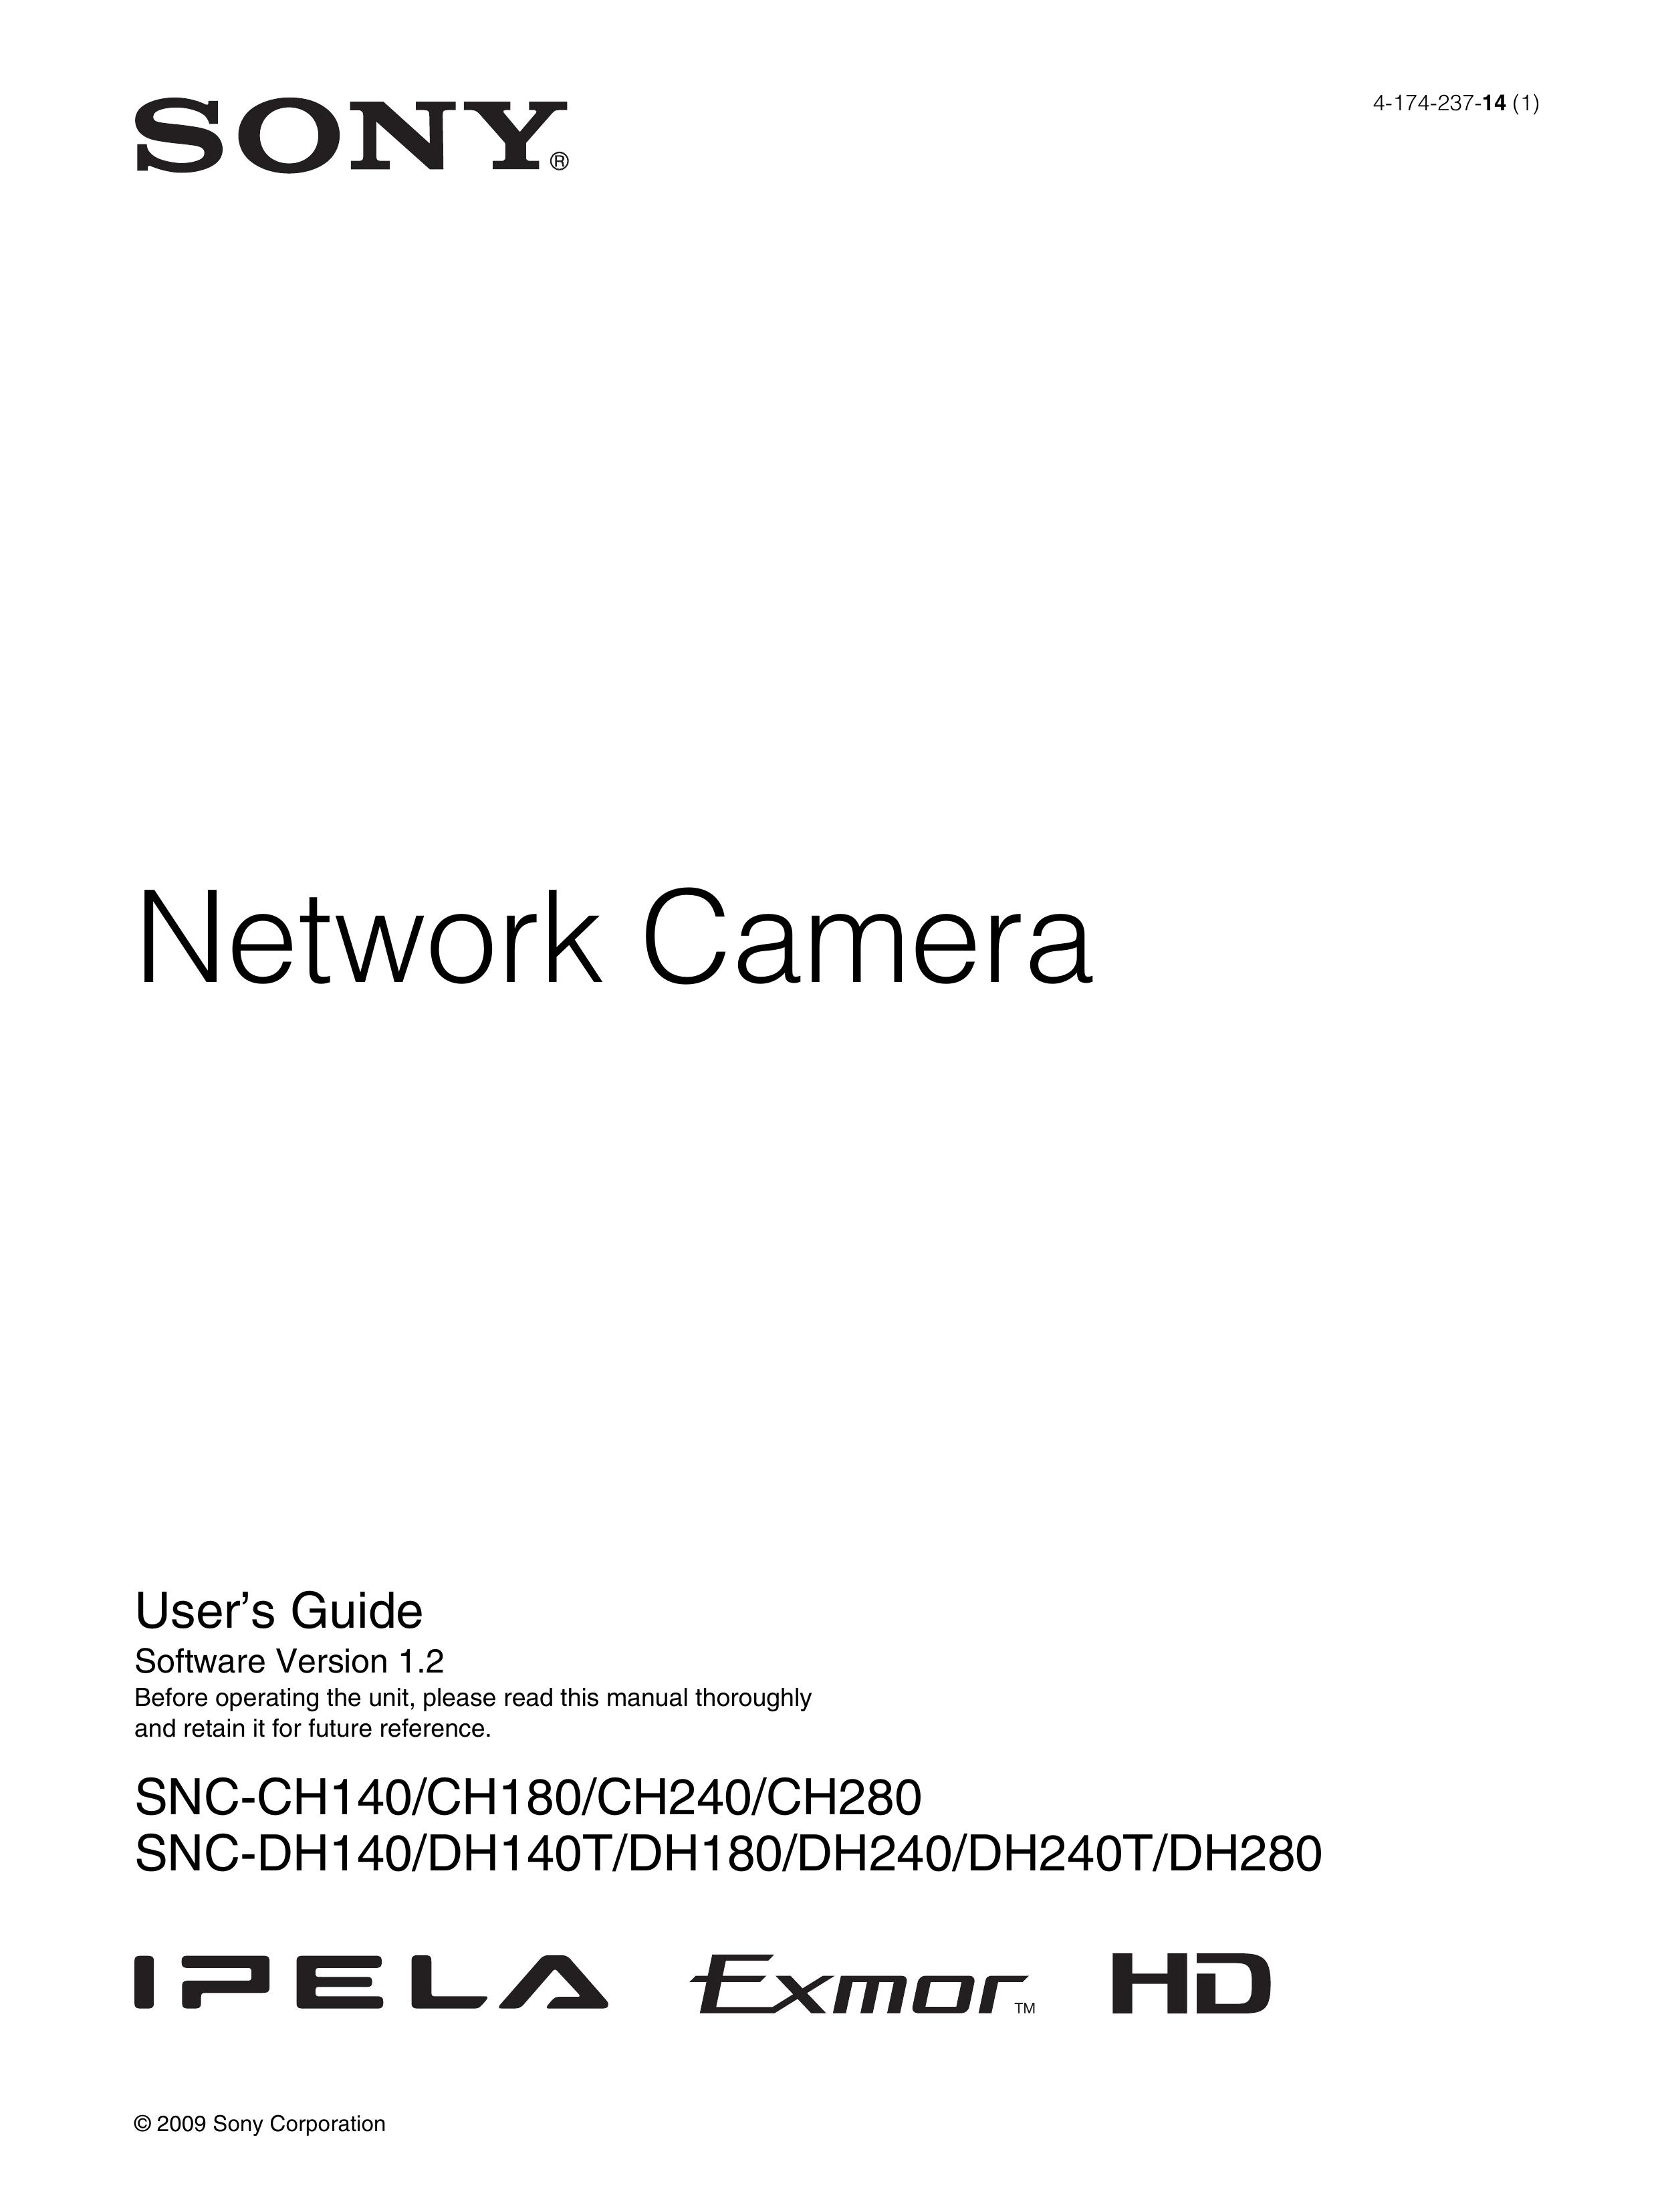 Sony DH240T Security Camera User Manual